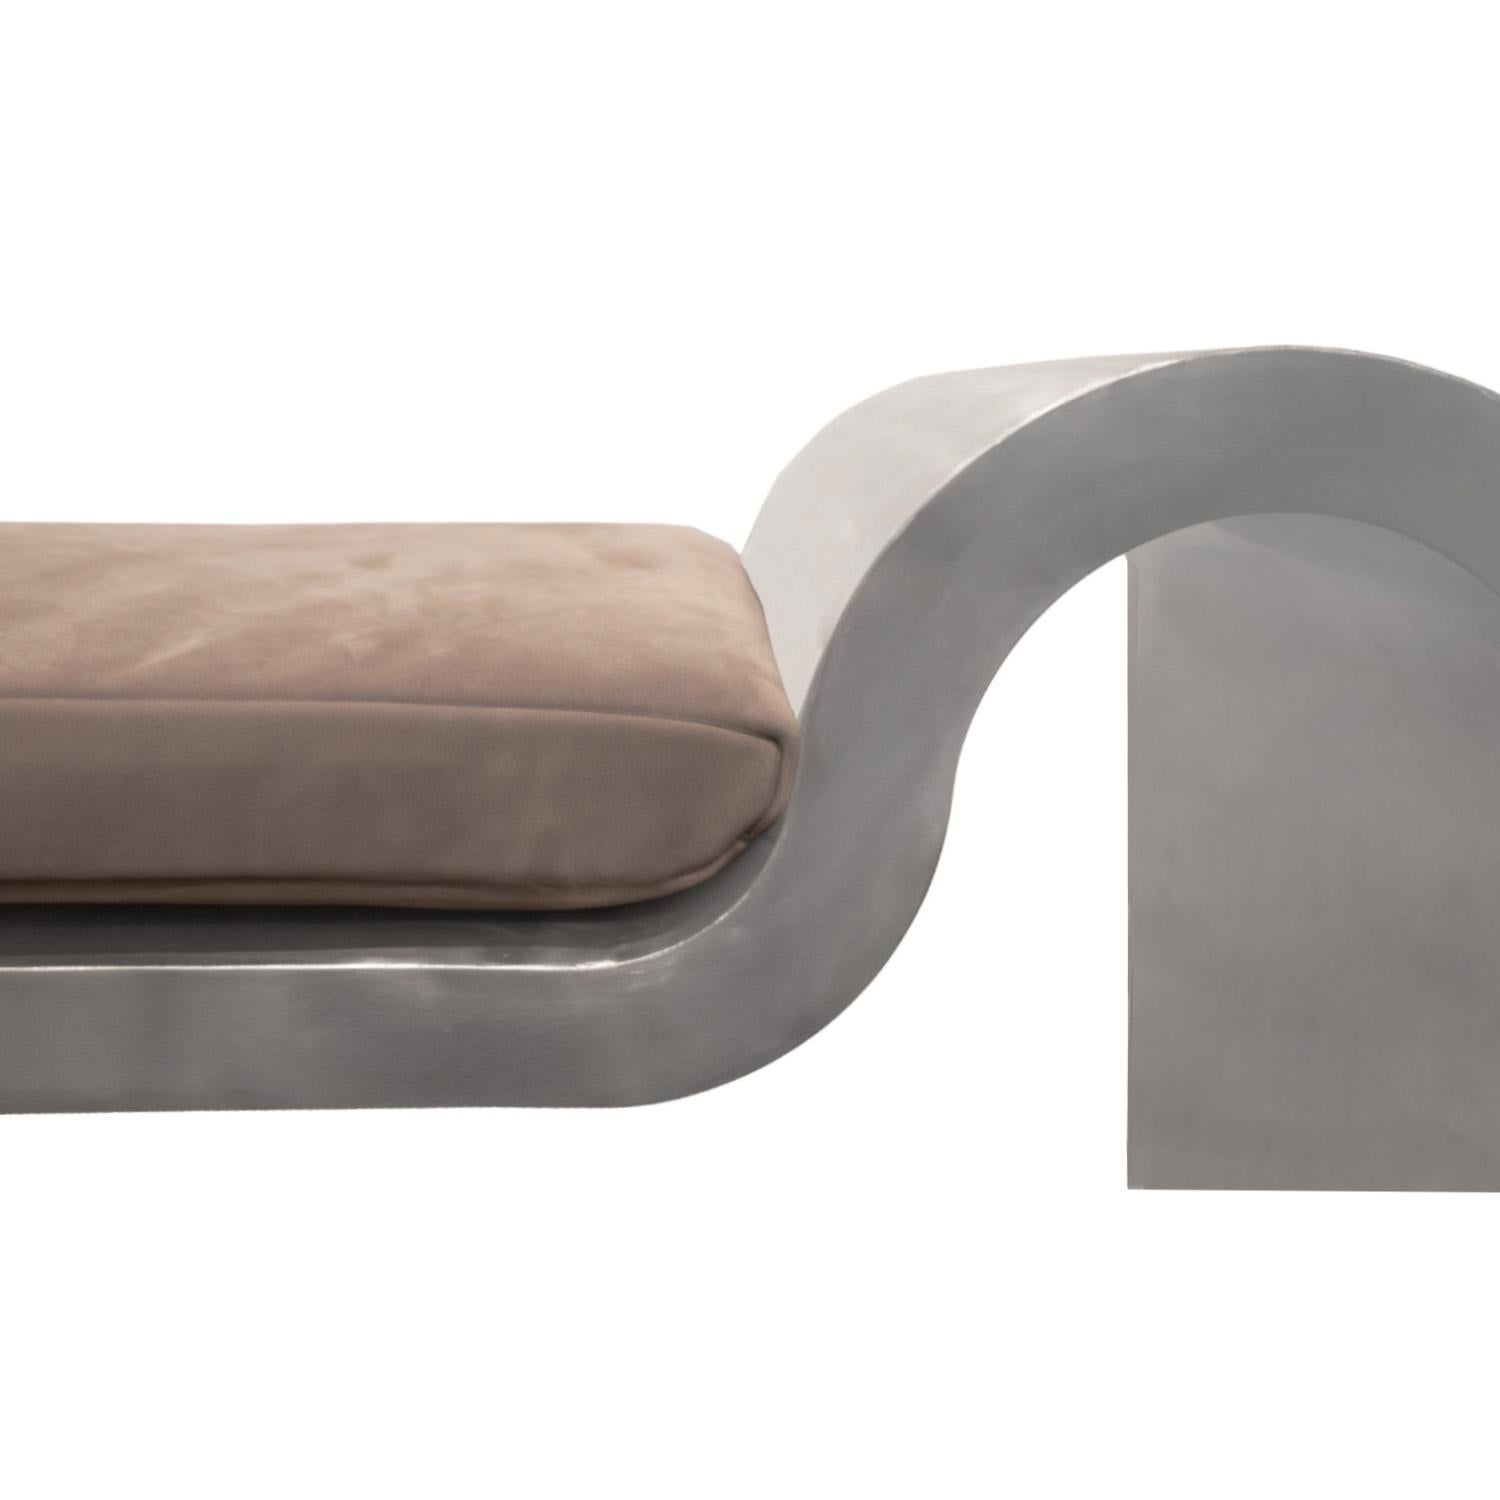 Hand-Crafted Karl Springer Sculptural Bench in Stainless Steel with Suede Seat Cushion, 1980s